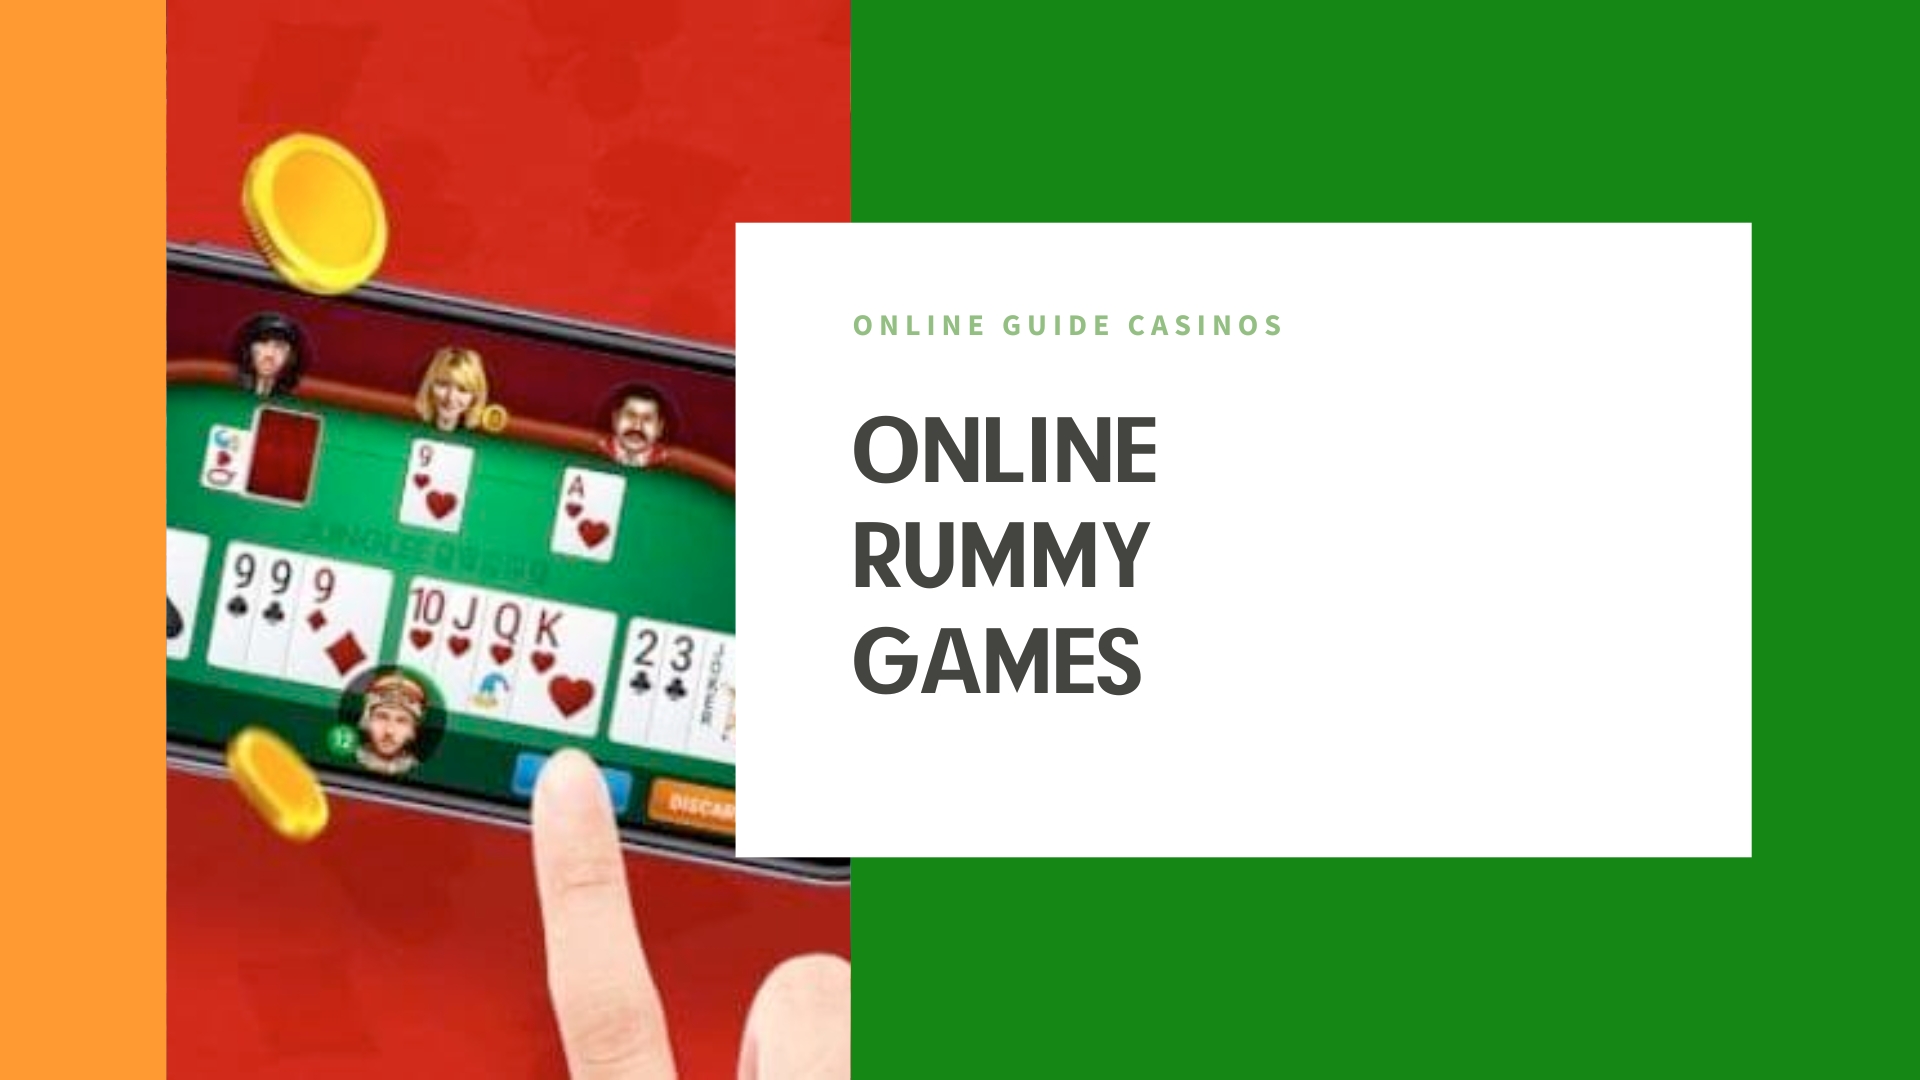 The game Rummy